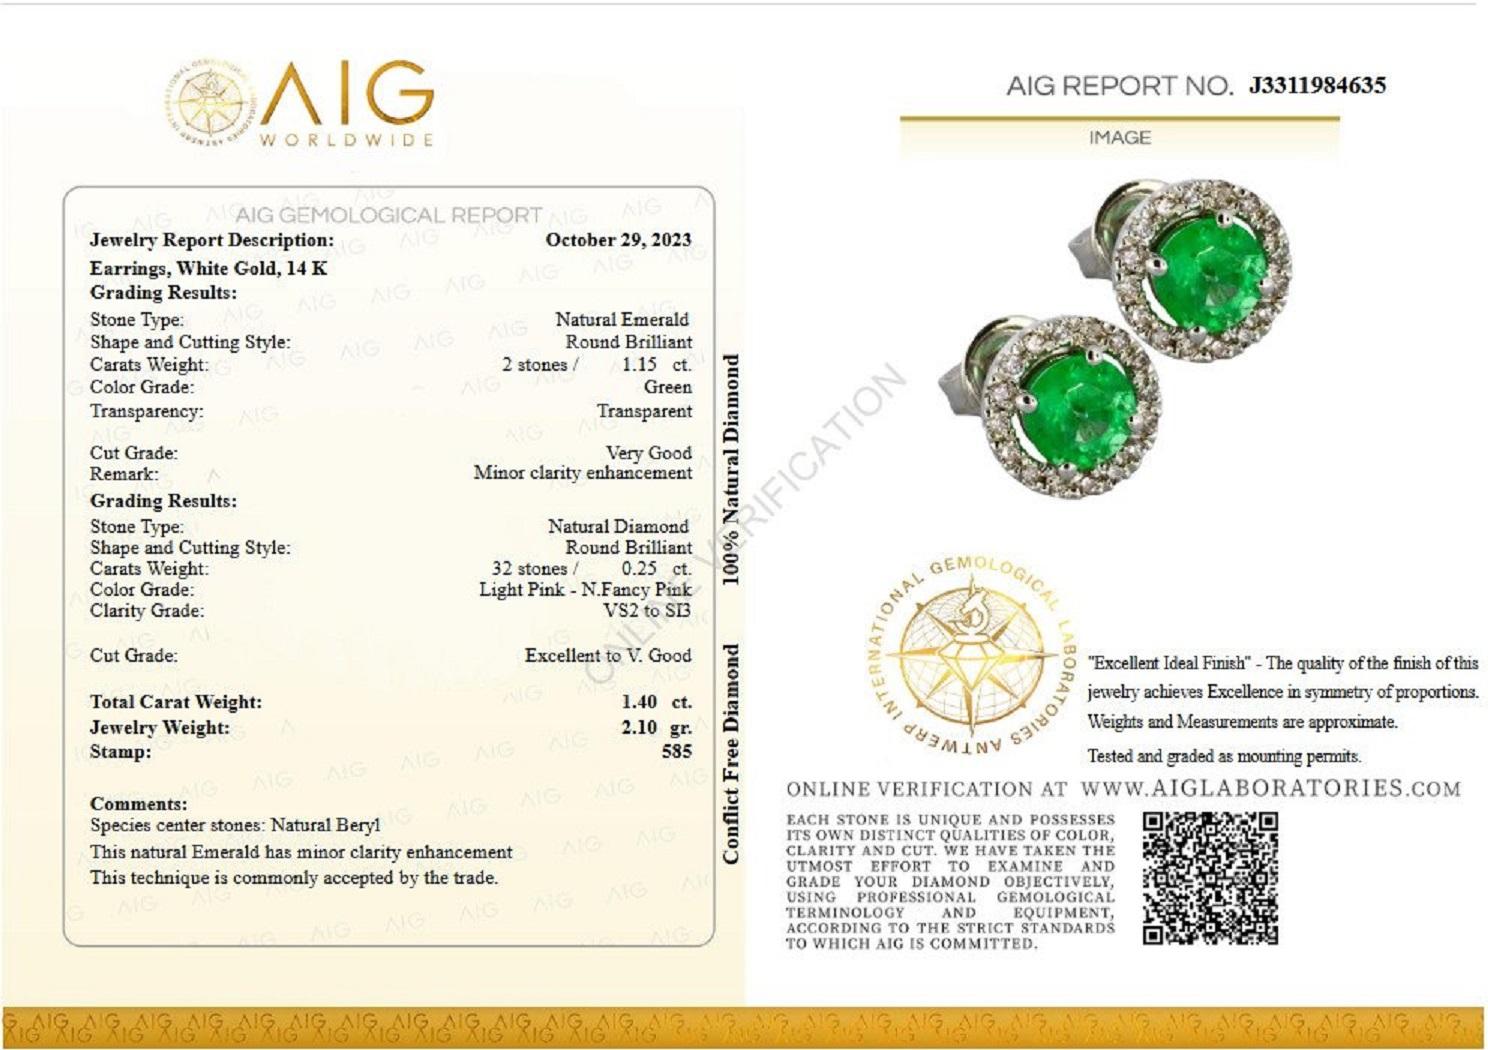 Center Stone:
___________
Natural Emeralds
Cut: Round Brilliant
Carat: 1.15 tcw / 2 pieces
Color: Green
This natural Emerald has minor clarity enhancement.

Side Stone:
___________
Natural Diamonds
Cut: Round Brilliant
Weight: 0.25 ctttw
Color: